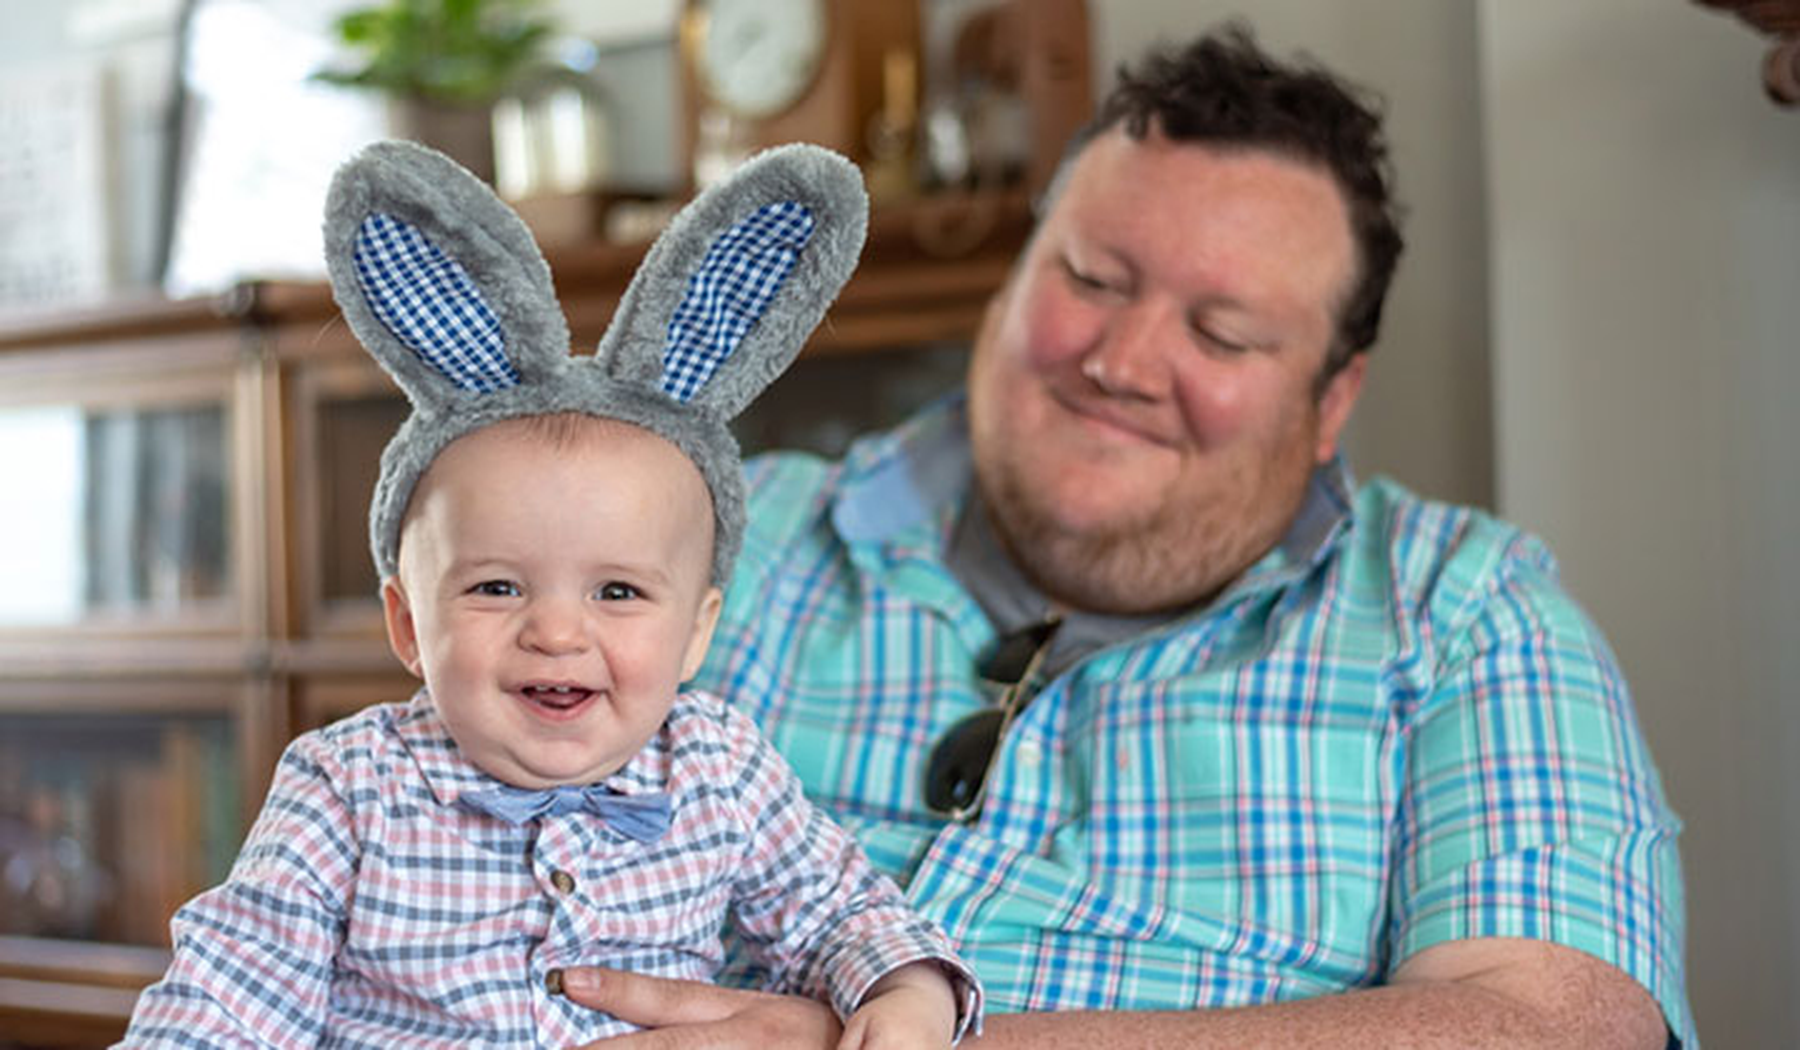 Smiling baby wearing bunny ears sitting on his dad's lap